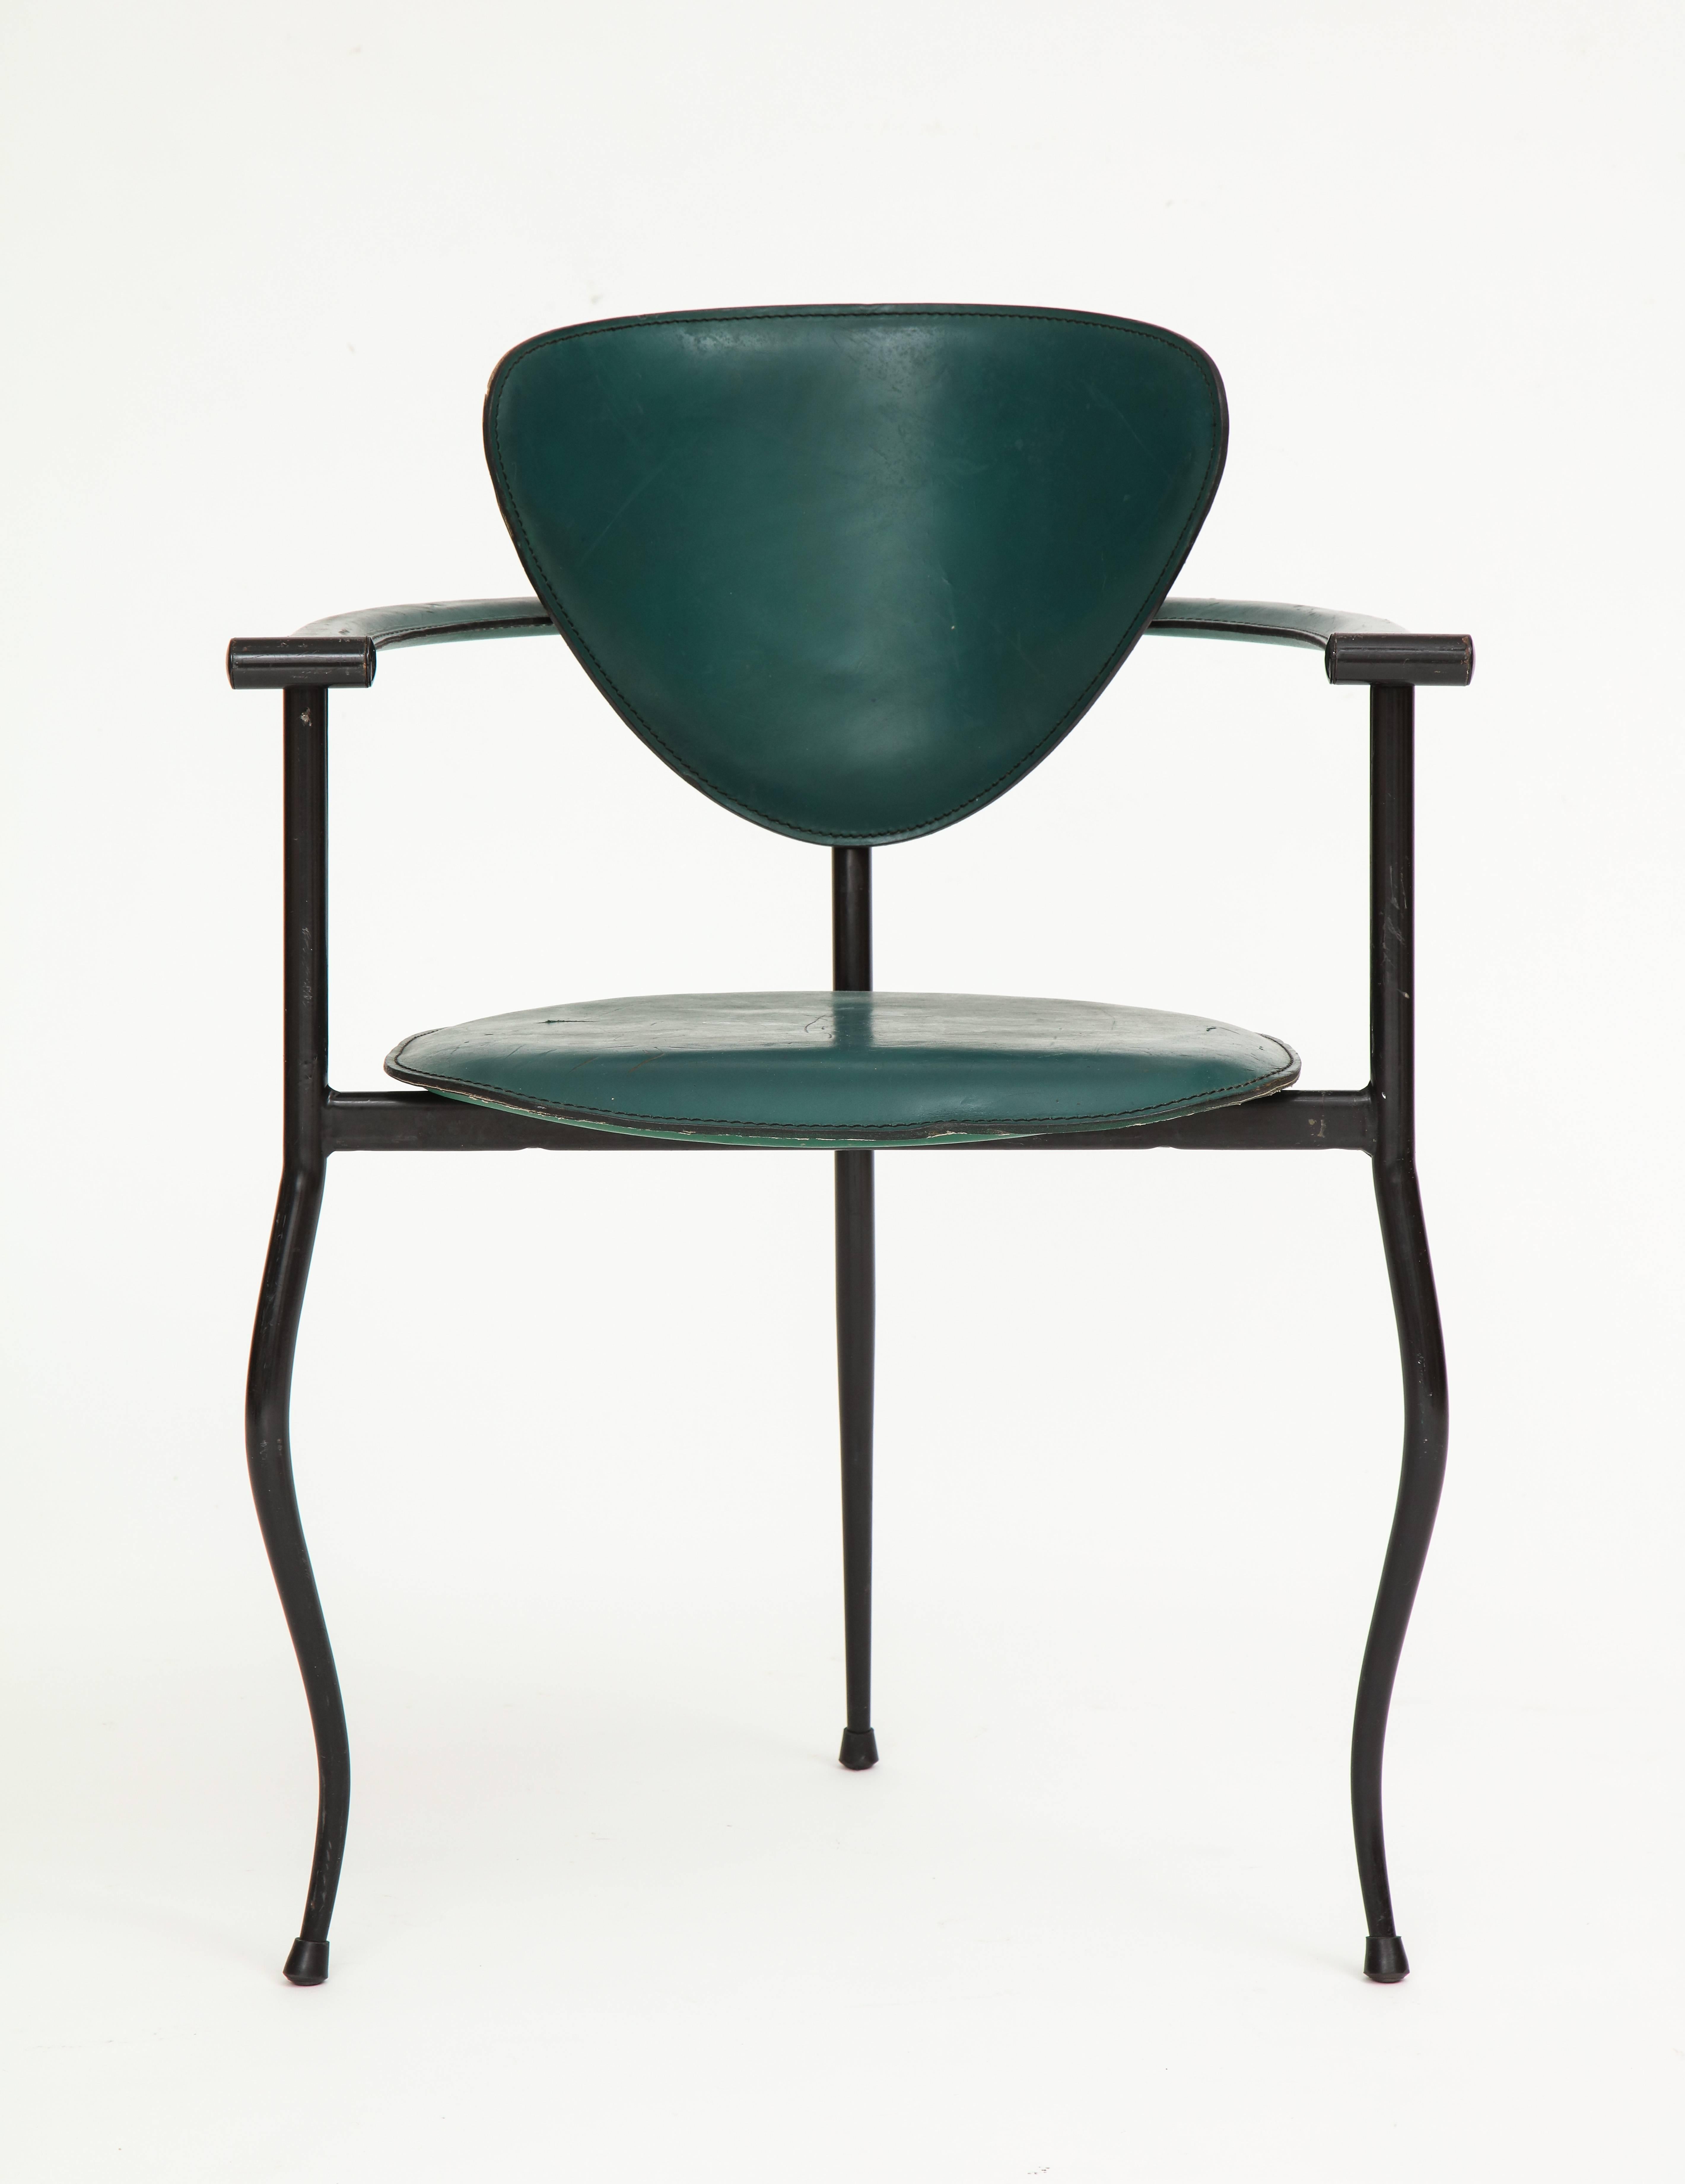 Italian Postmodern Sculptural Green Leather and Iron Side Chairs, 1980s-1990s